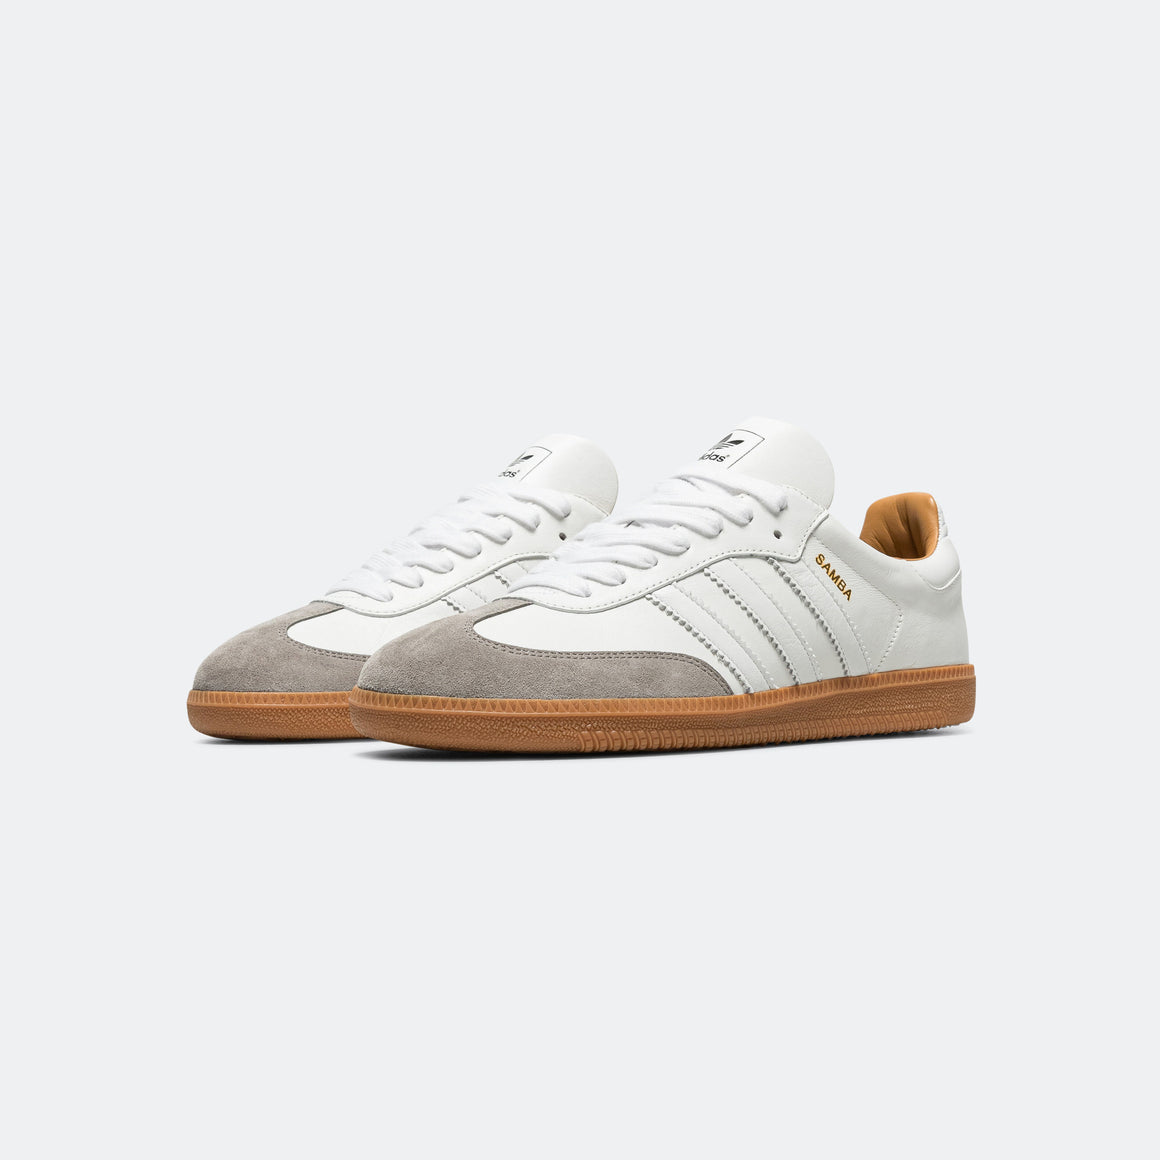 adidas - Samba OG Made in Italy - Core White/Core Black-Gum - UP THERE